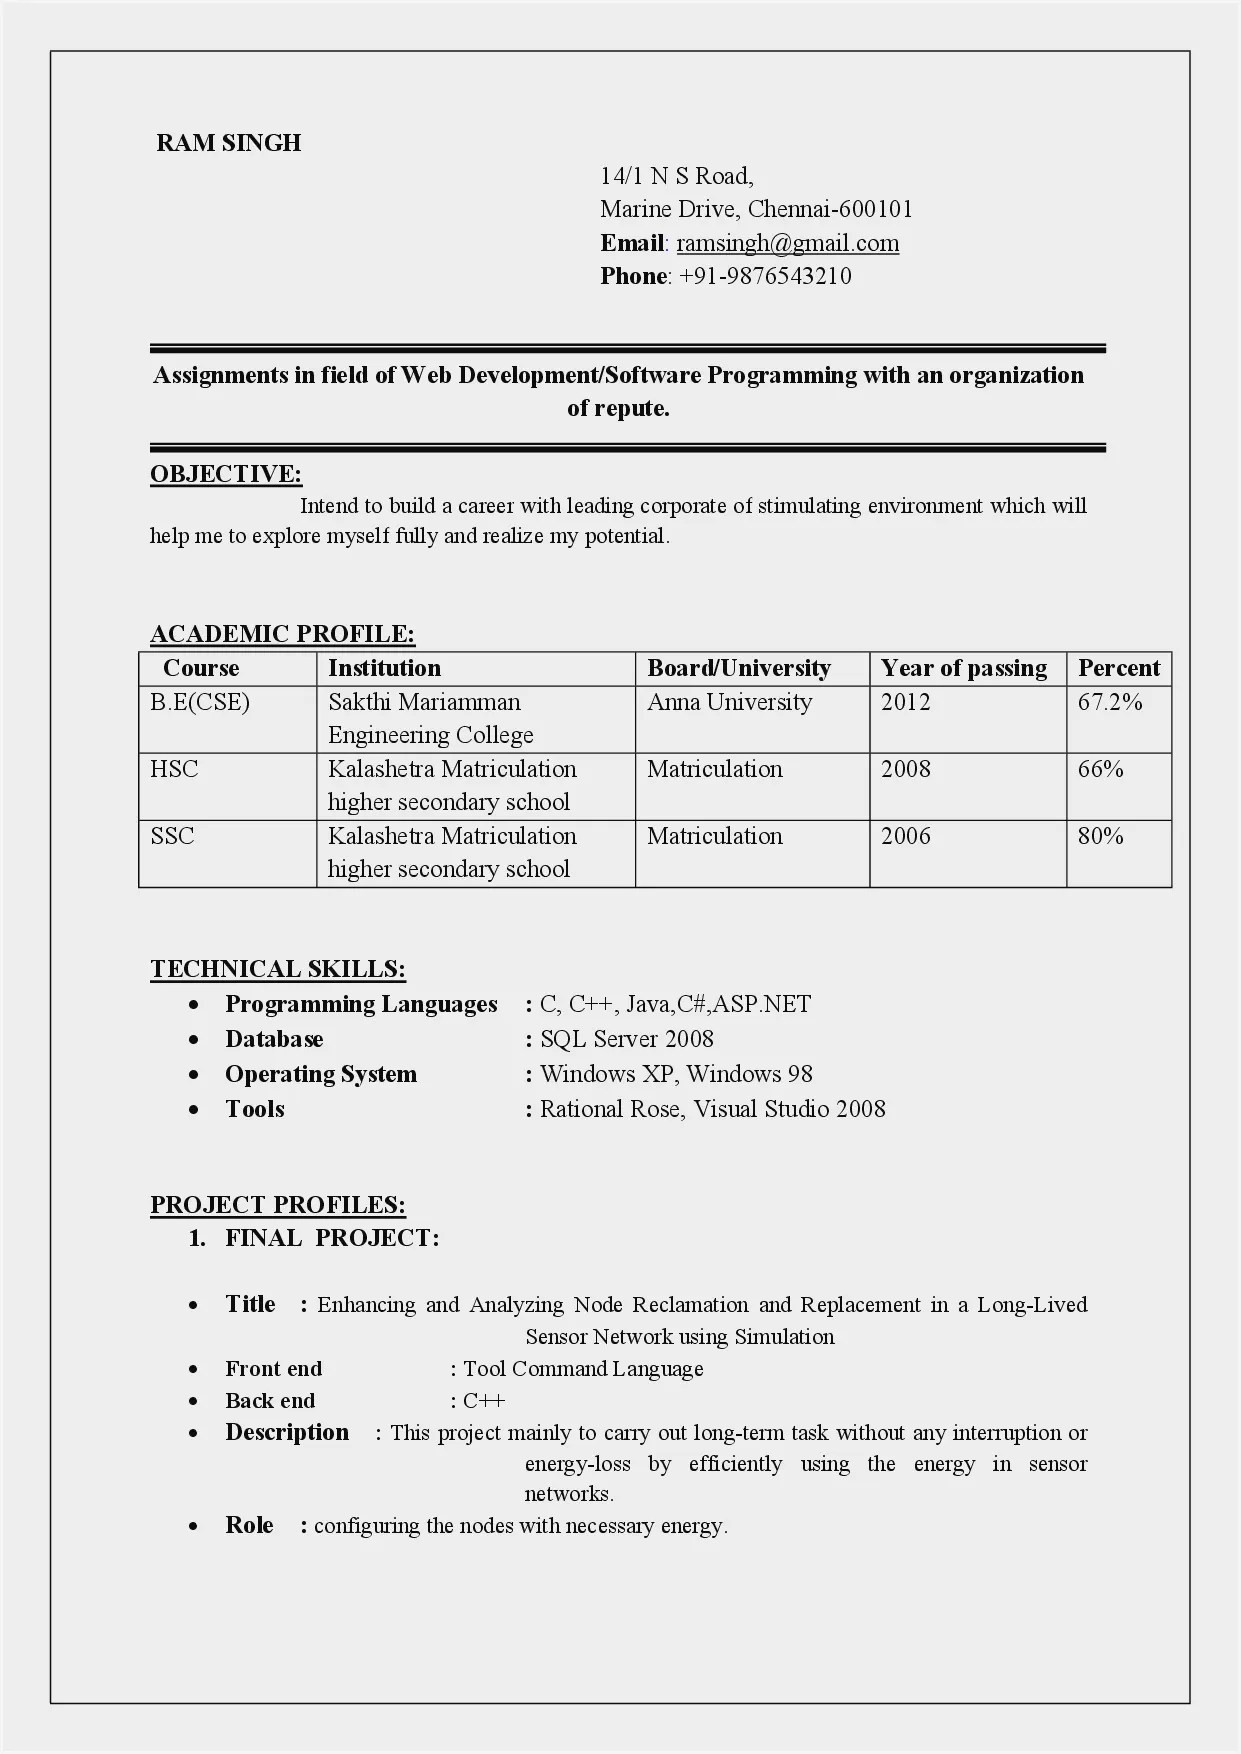 Resume Templates for Freshers Engineers Free Download Civil Engineering